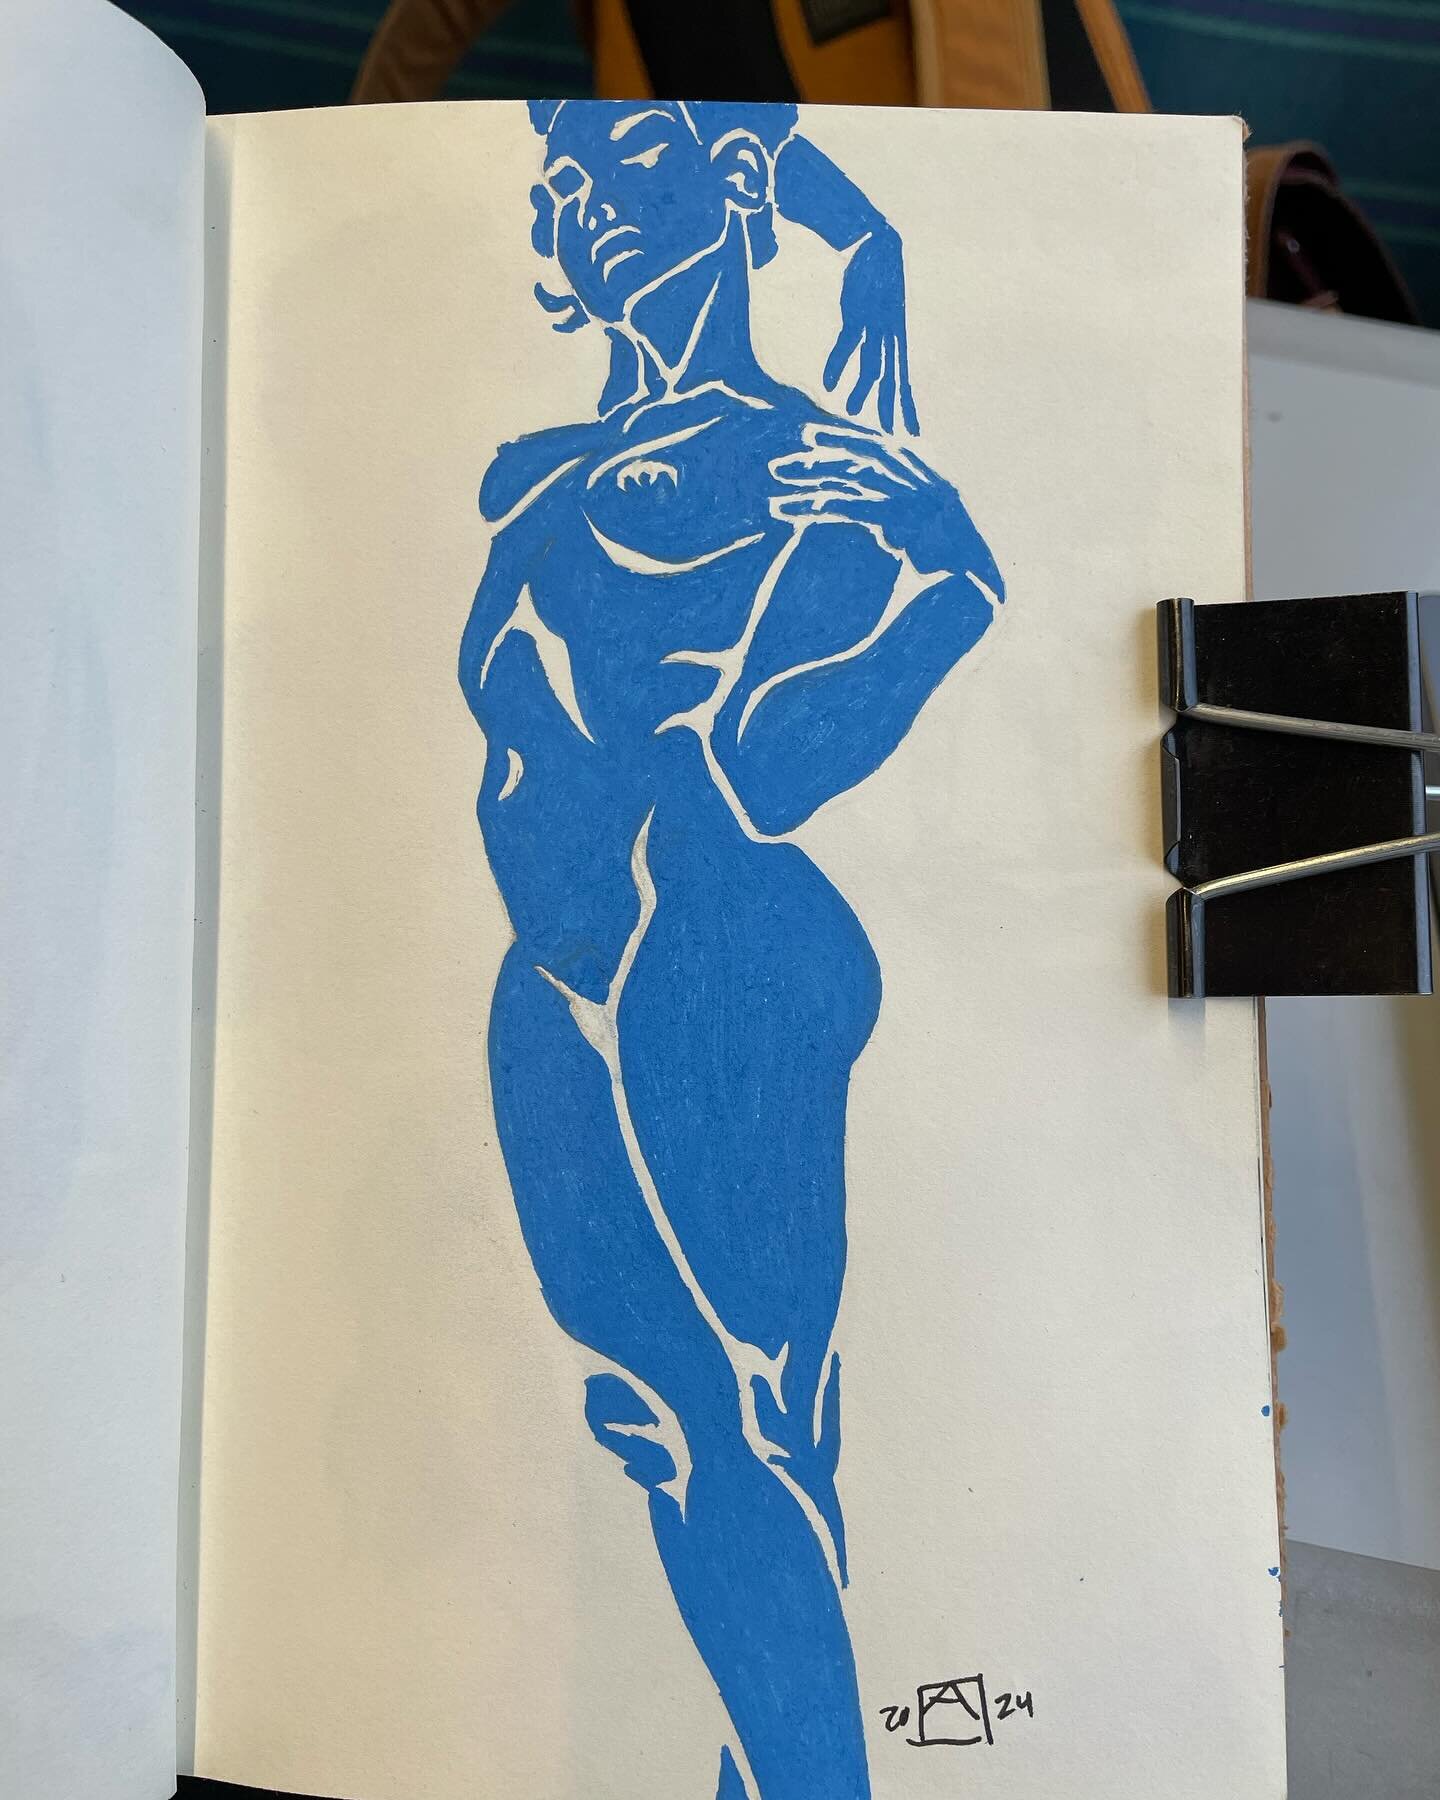 Trying to find sublimity in simplicity...

Here's another blue figure from the Matisse inspired Draw Brighton session a few weeks back. 

Nicole -- AKA @bluede_model3 -- was inspiring with every pose, intimately aware not just of how her movement wou